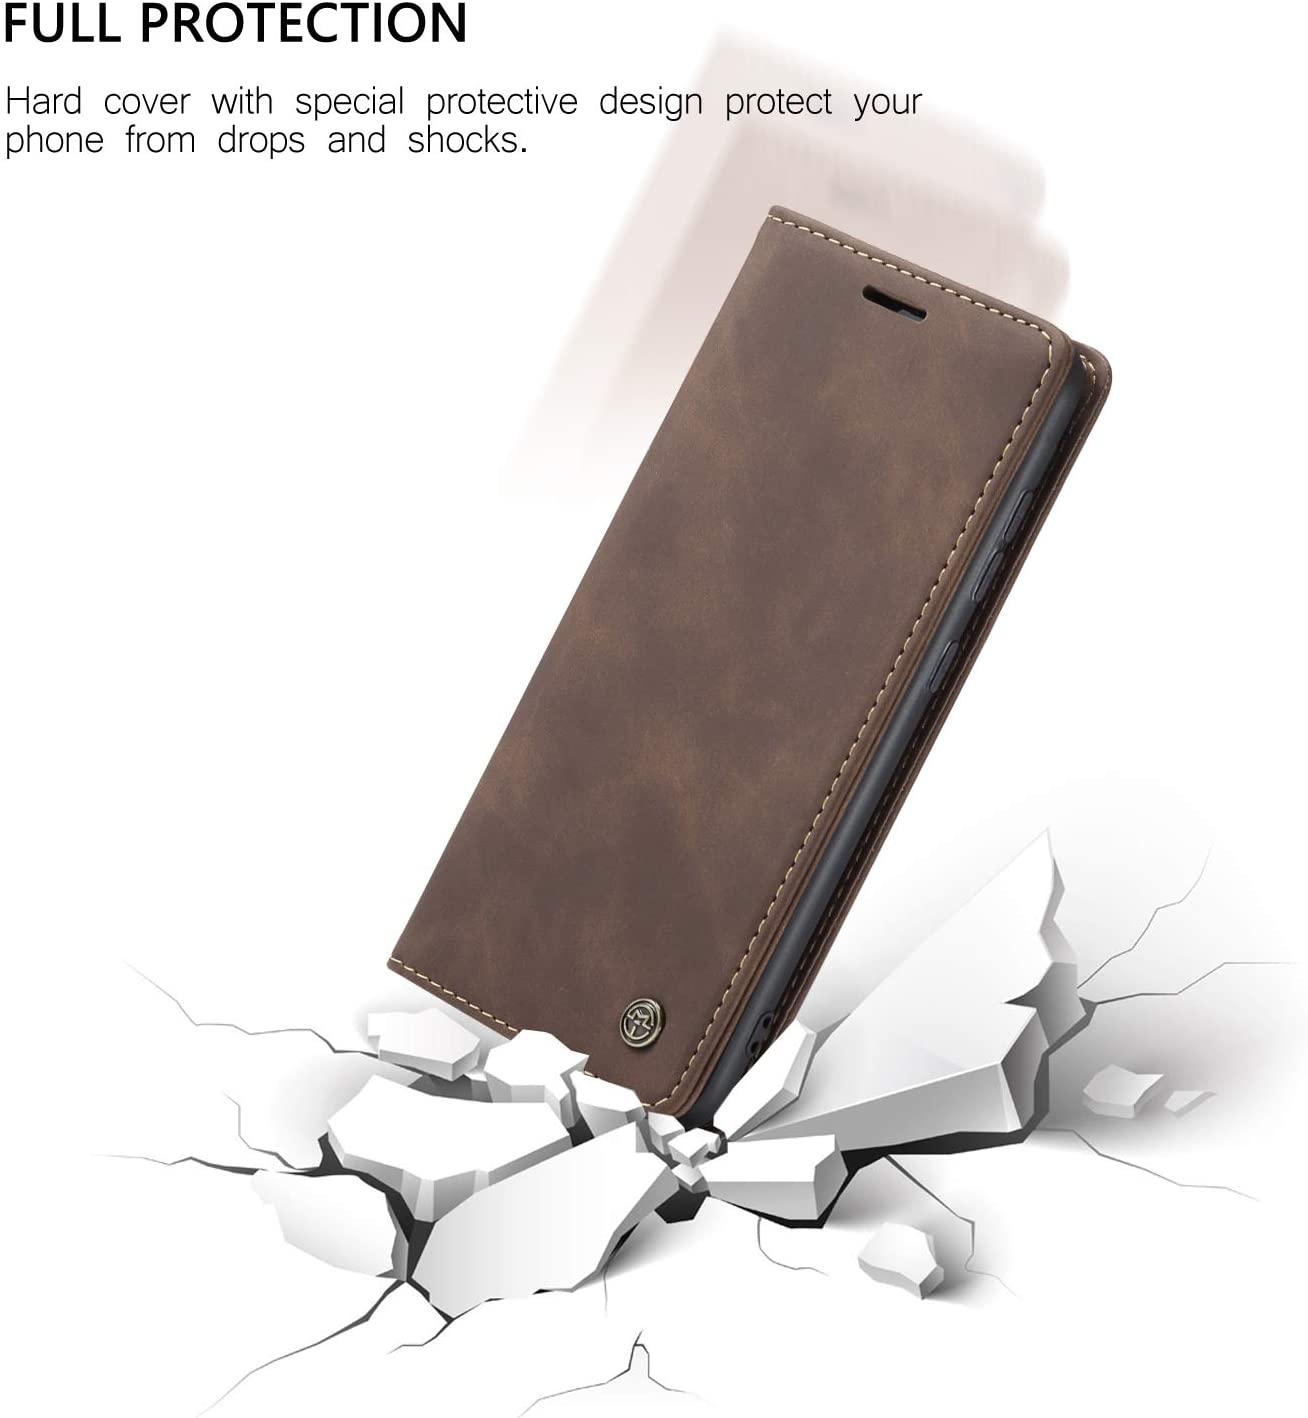 Samsung Galaxy S20 Ultra 360 degree protection leather wallet flip cover by excelsior